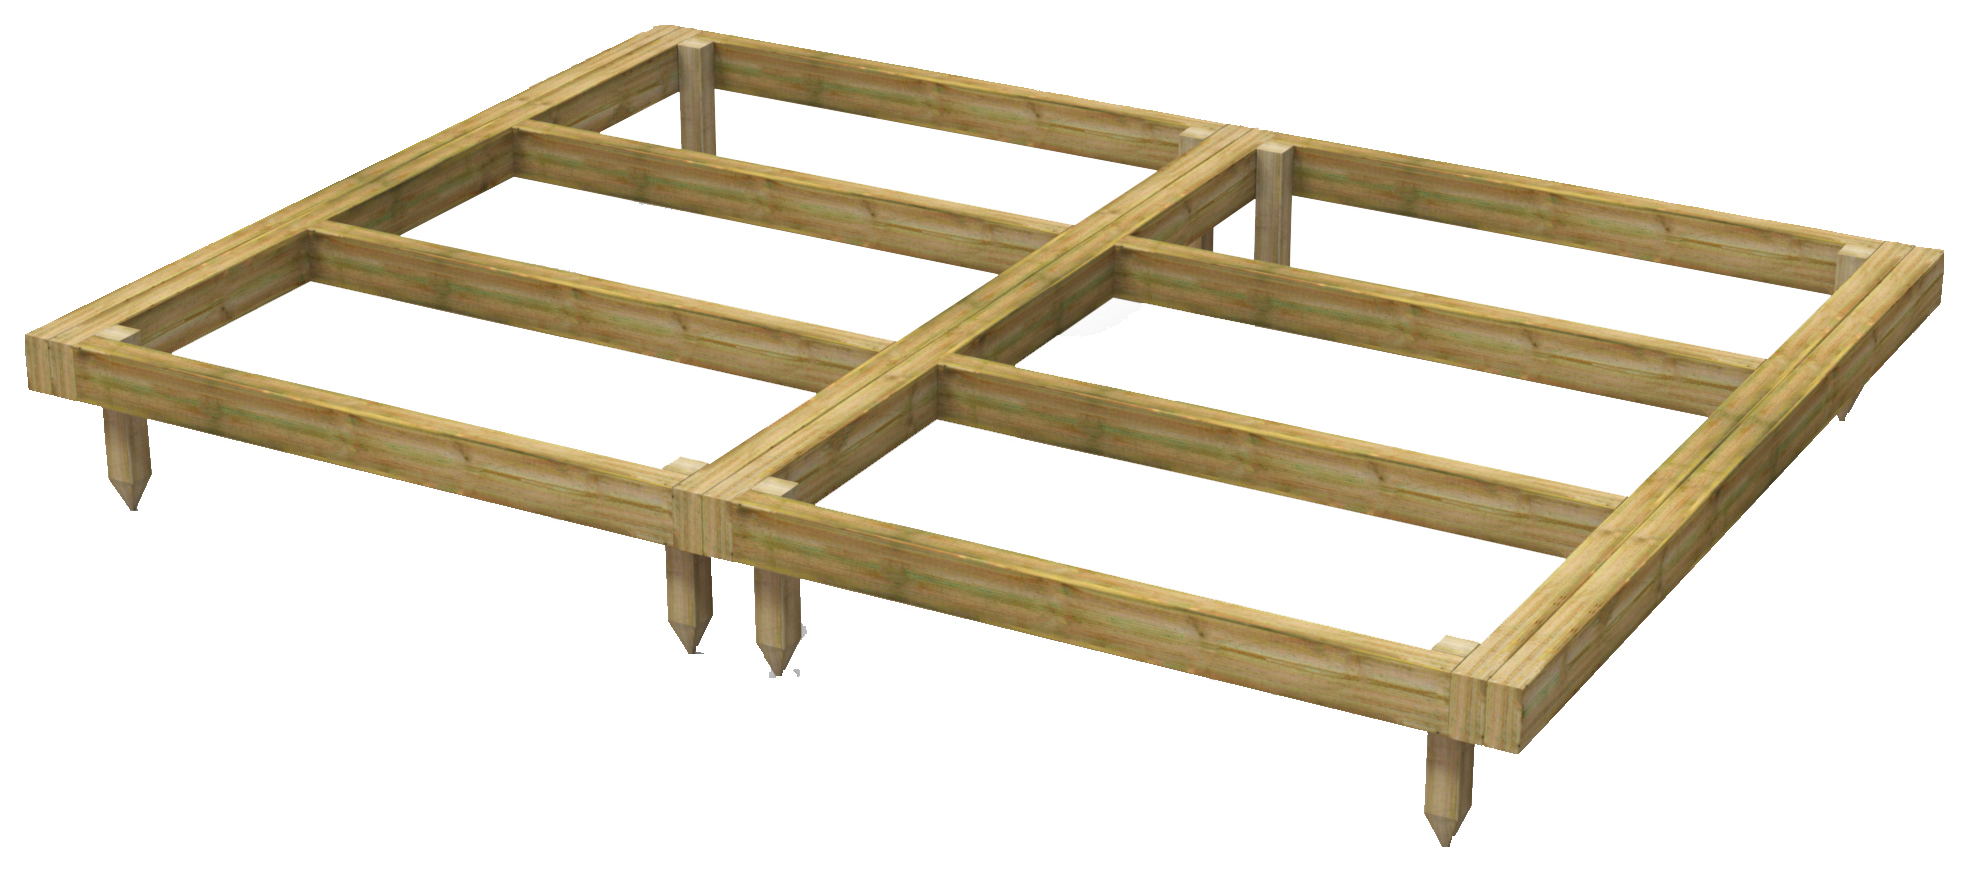 Image of Power Sheds 8 x 6ft Pressure Treated Garden Building Base Kit